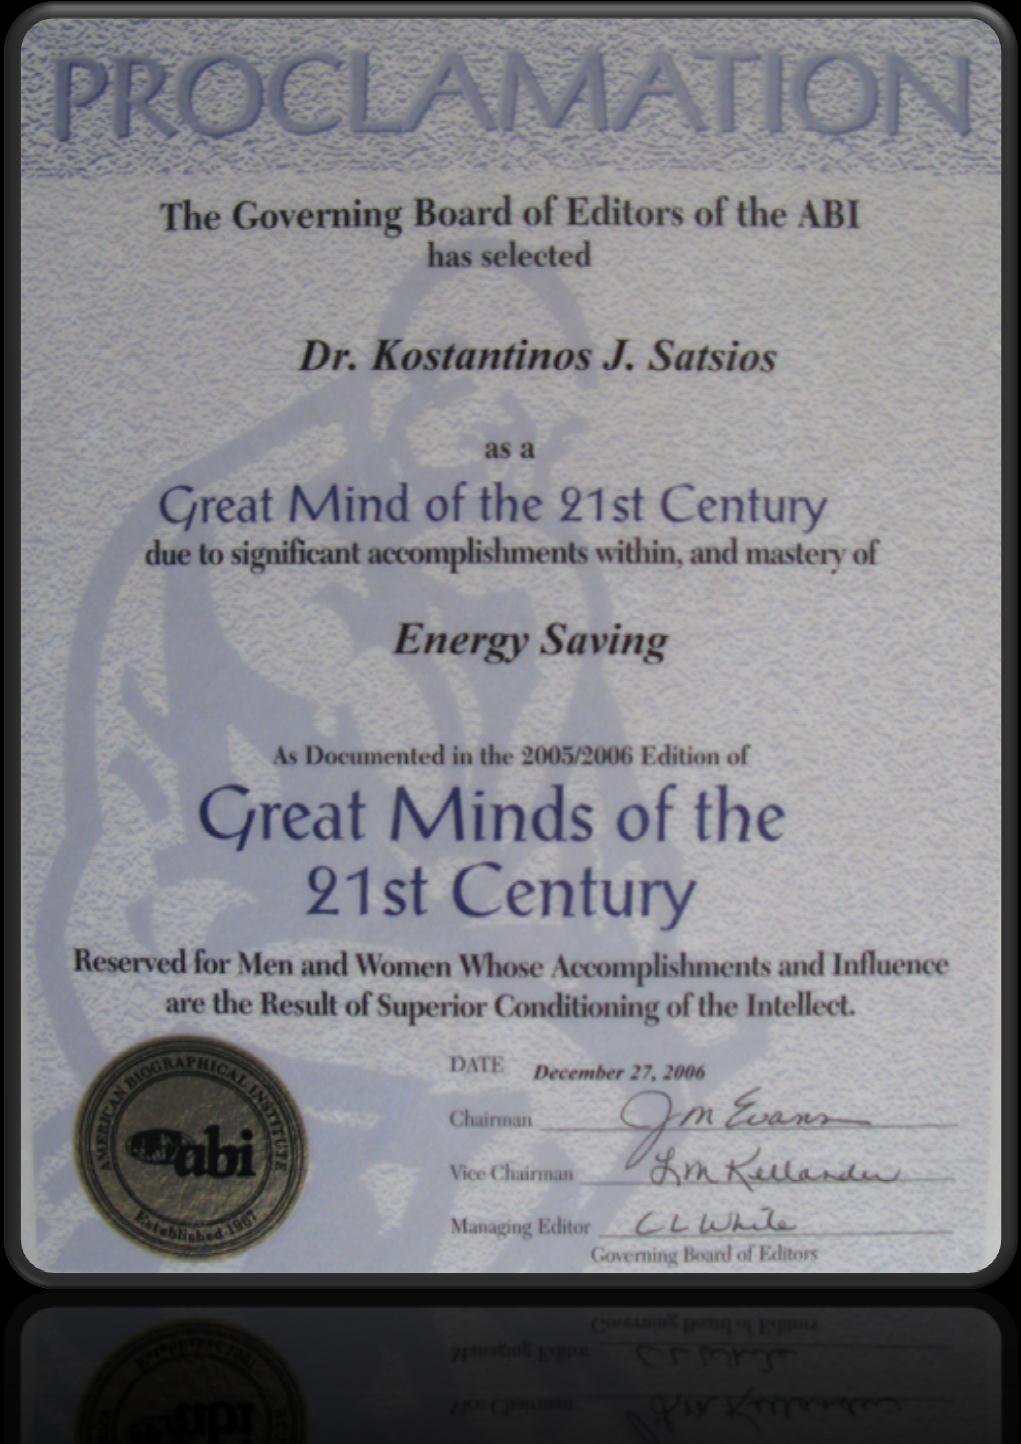 Great Mind of 21st Century (American Biographical Institute)